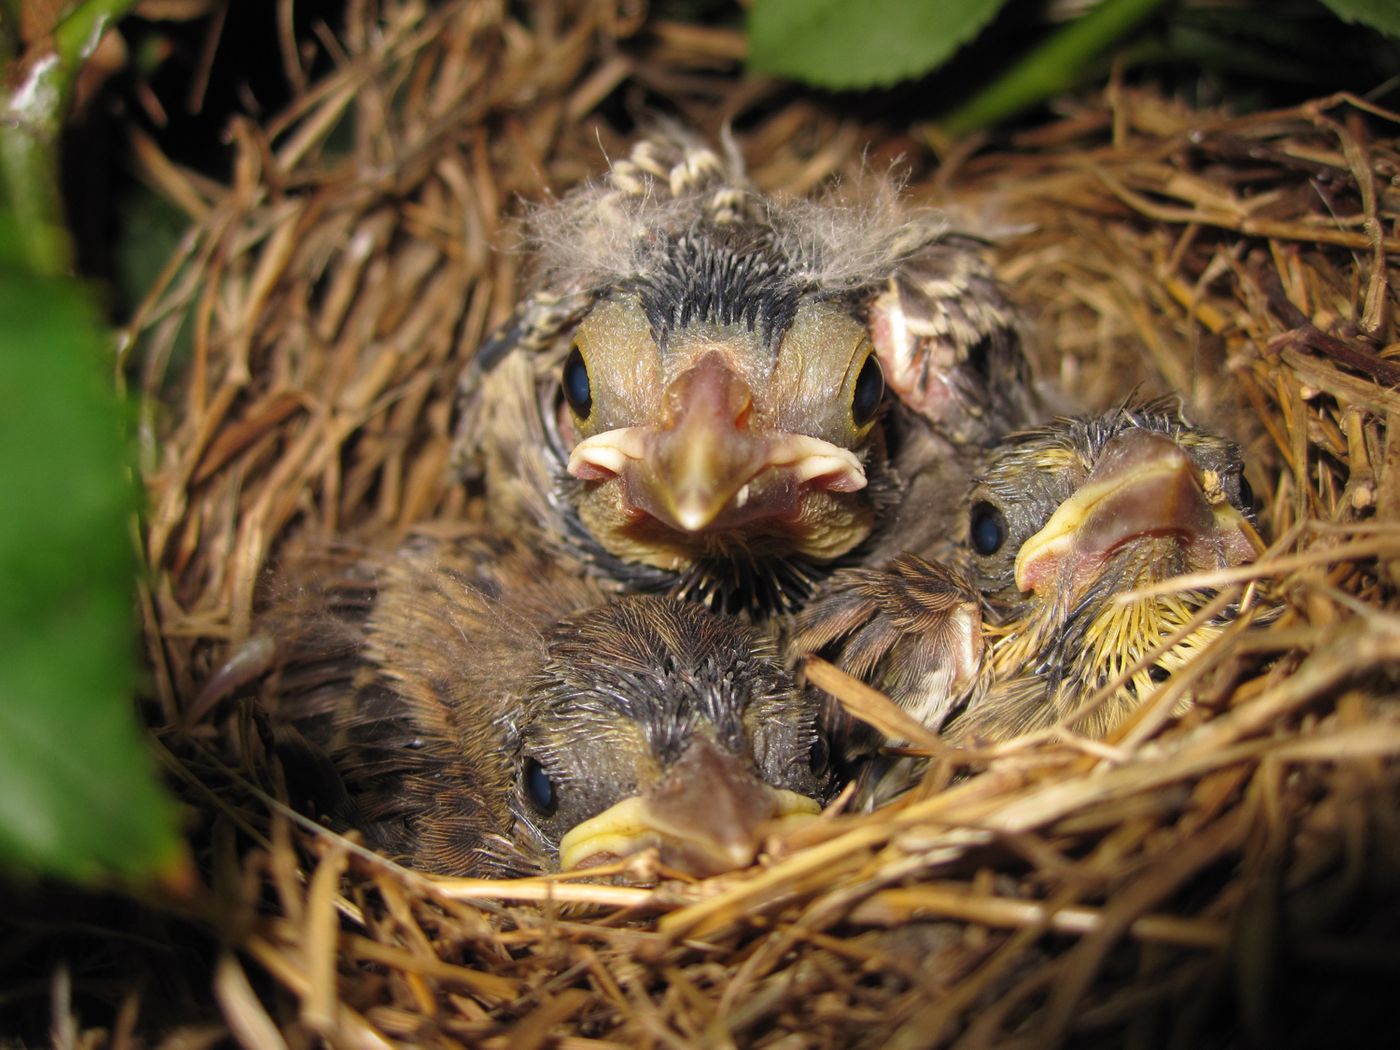 Male sparrows retaliate to cheating partners by providing less food for the nest.